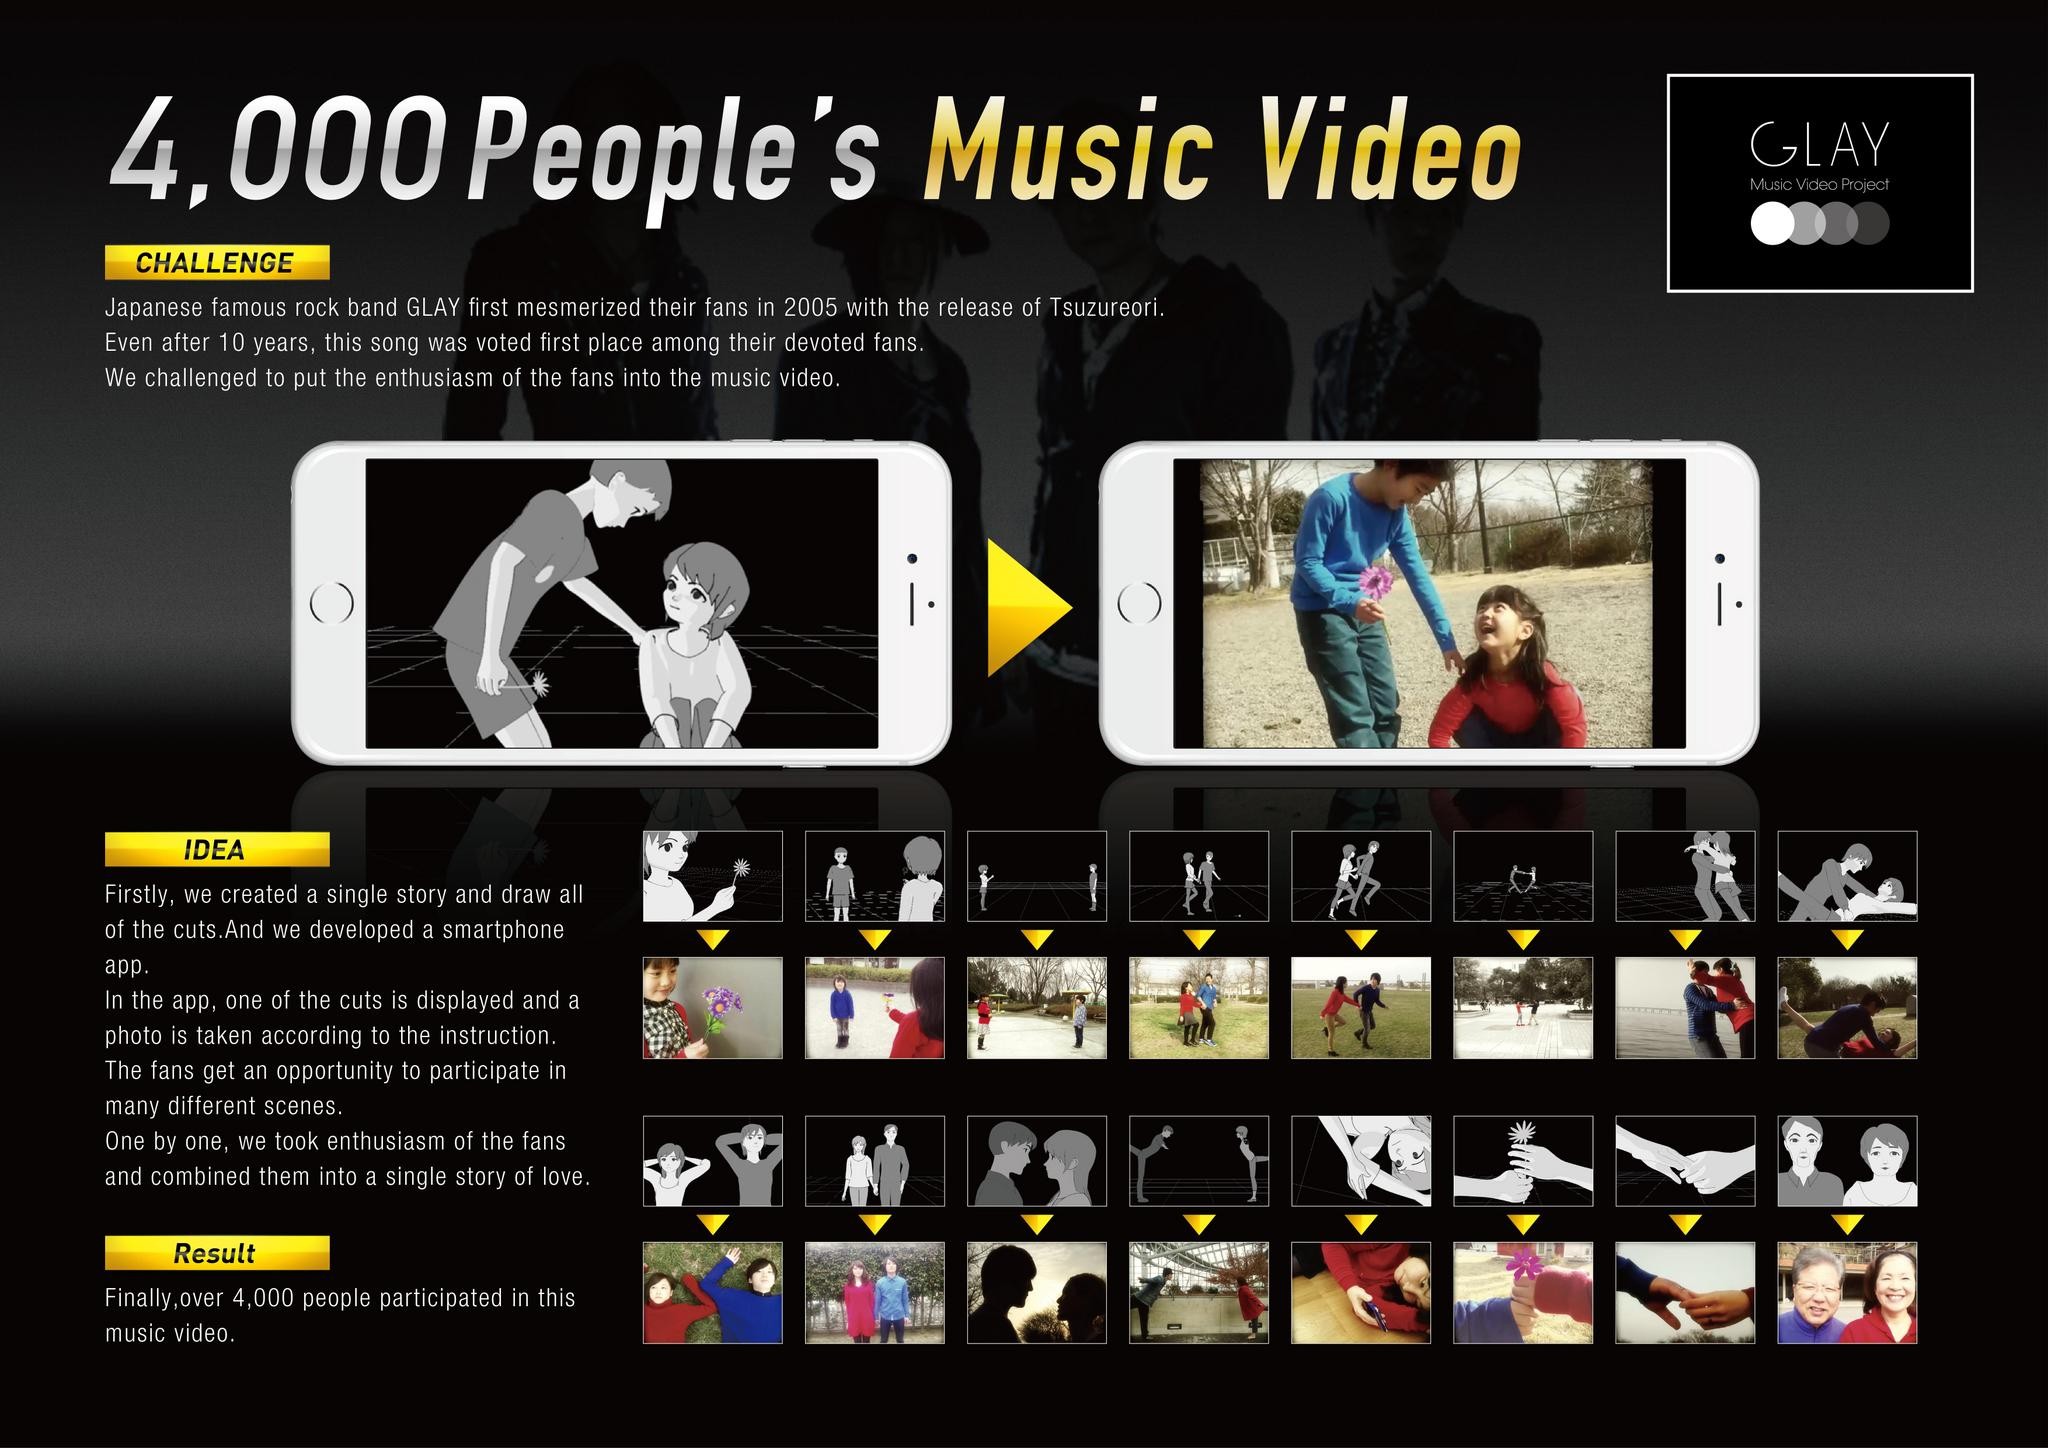 4,000 PEOPLE’S MUSIC VIDEO